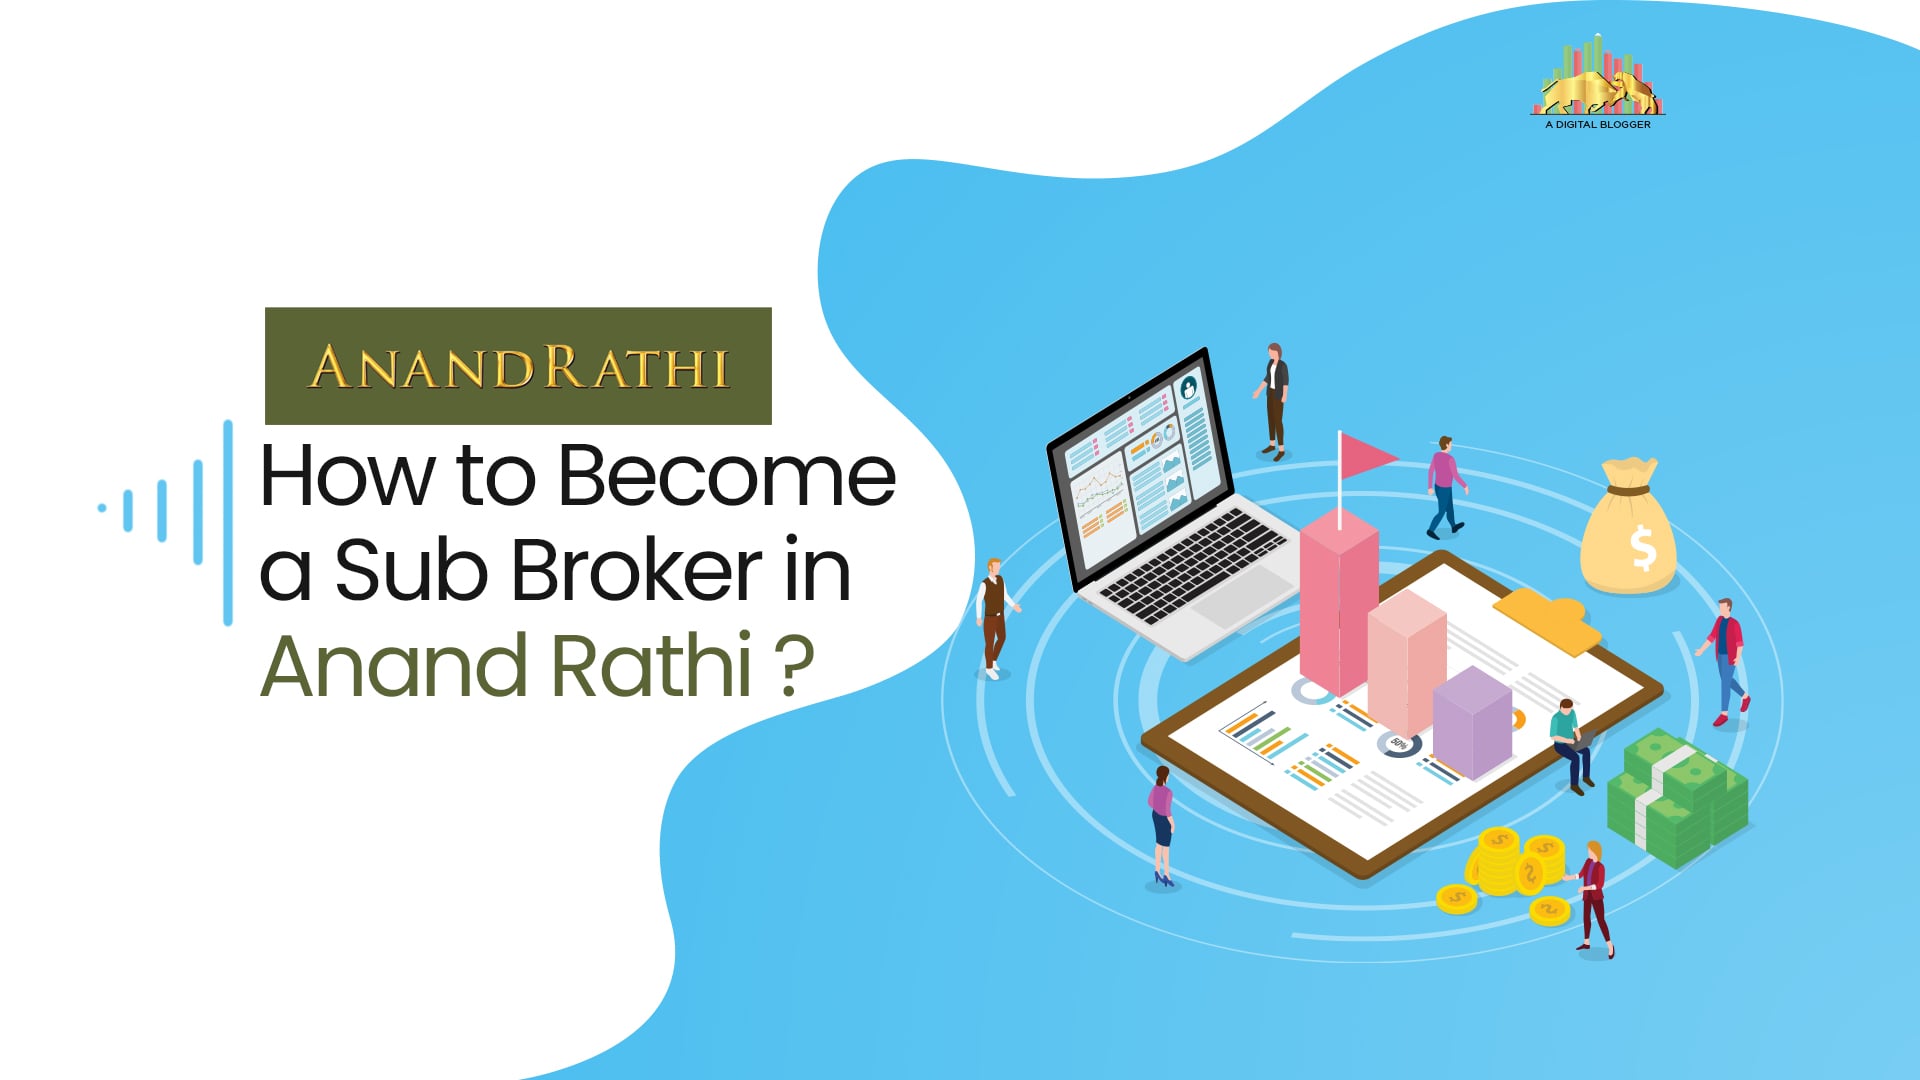 How to Become a Sub Broker in Anand Rathi?